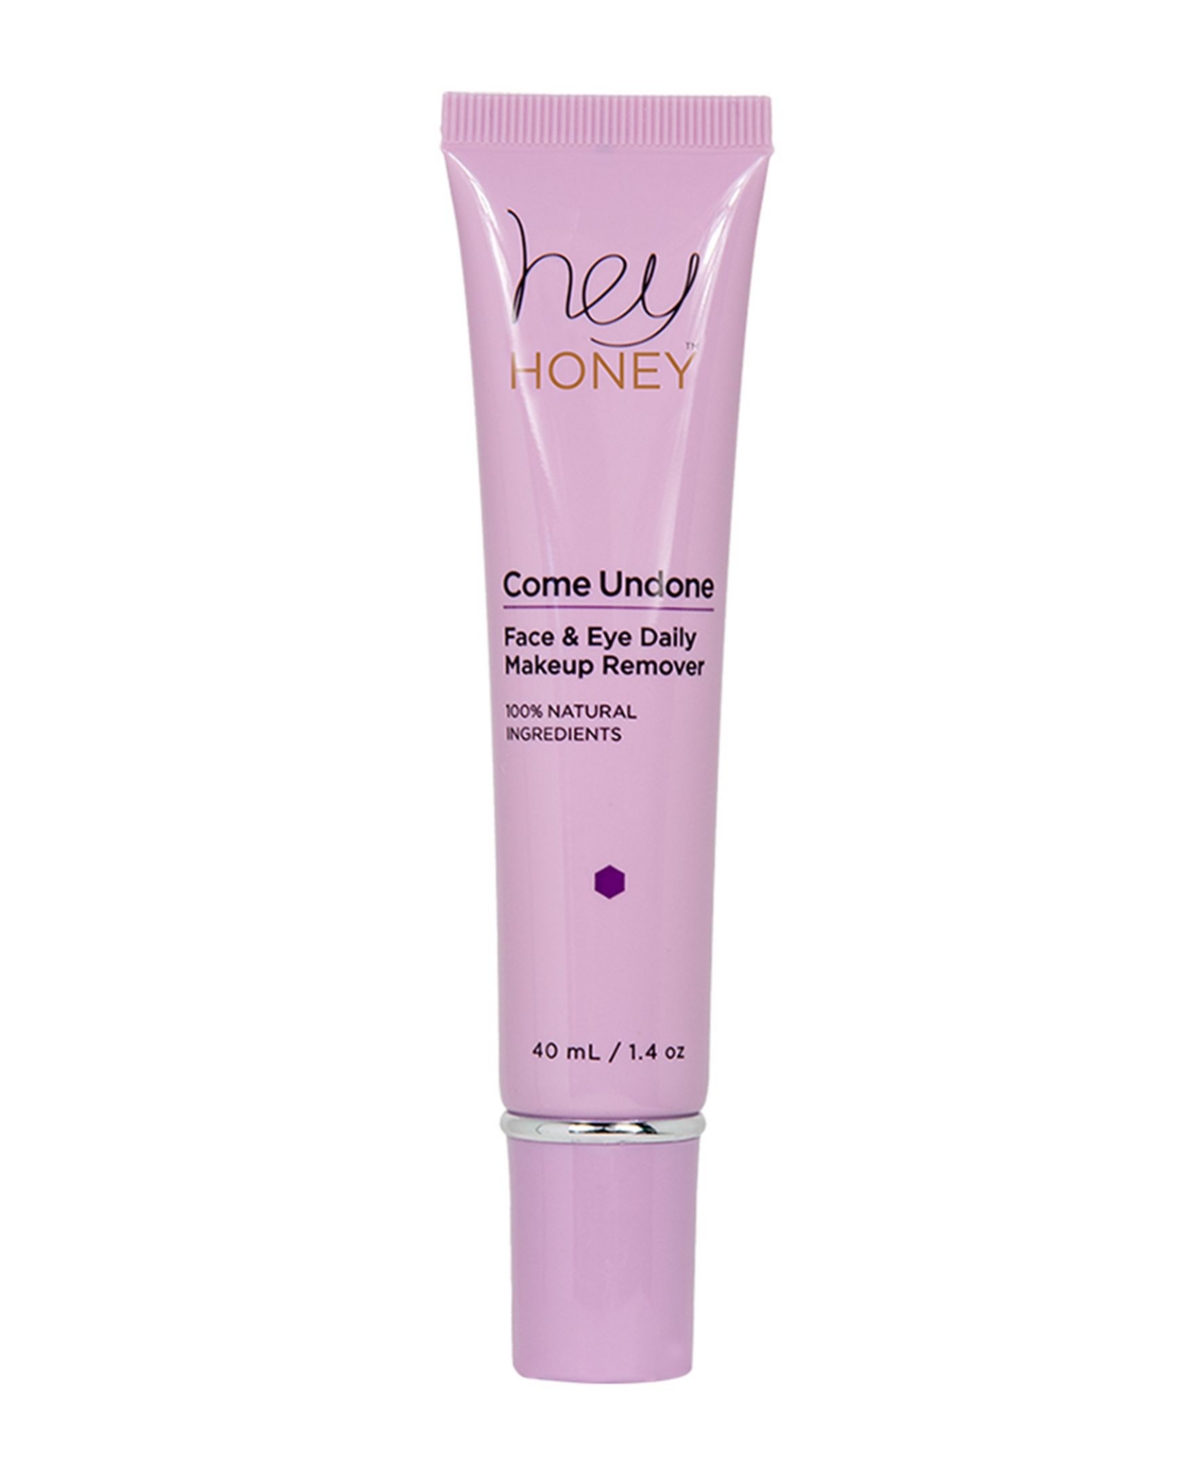 Hey Honey Come Undone Daily Makeup Remover For Face and Eyes, 40 ml